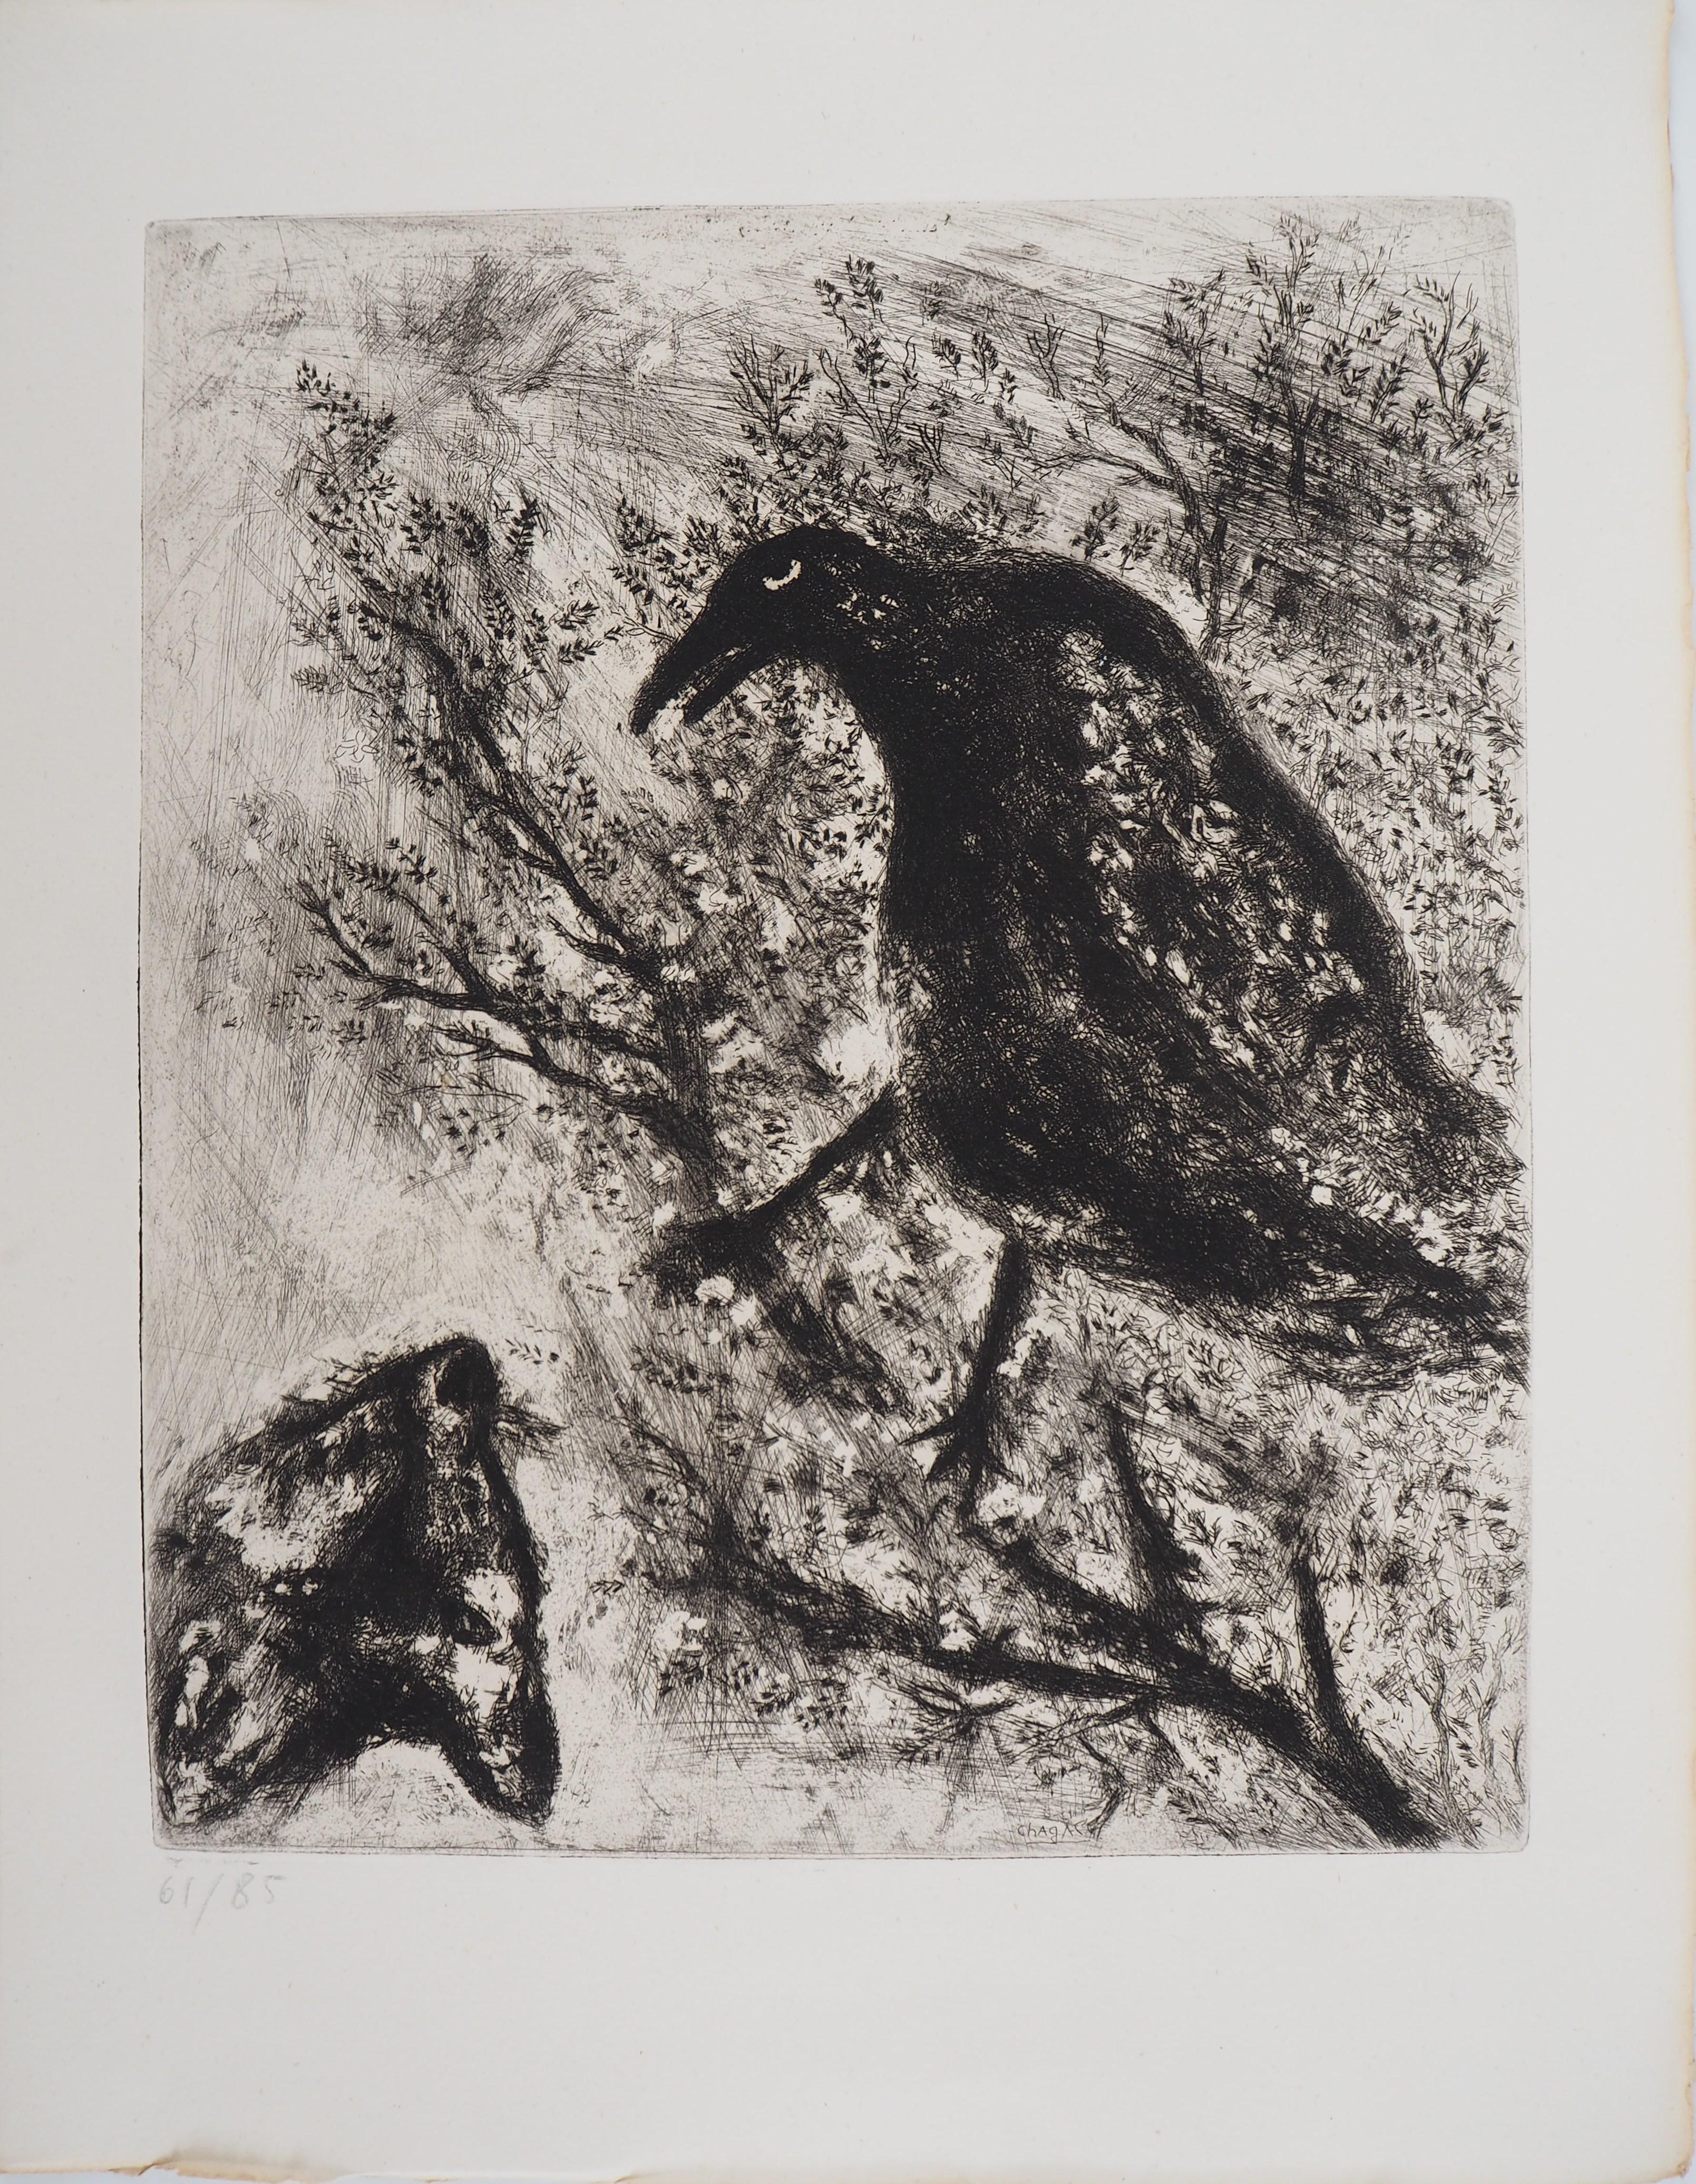 Marc Chagall Animal Print – The Raven and the Fox - Original etching - Ref. Sorlier #195